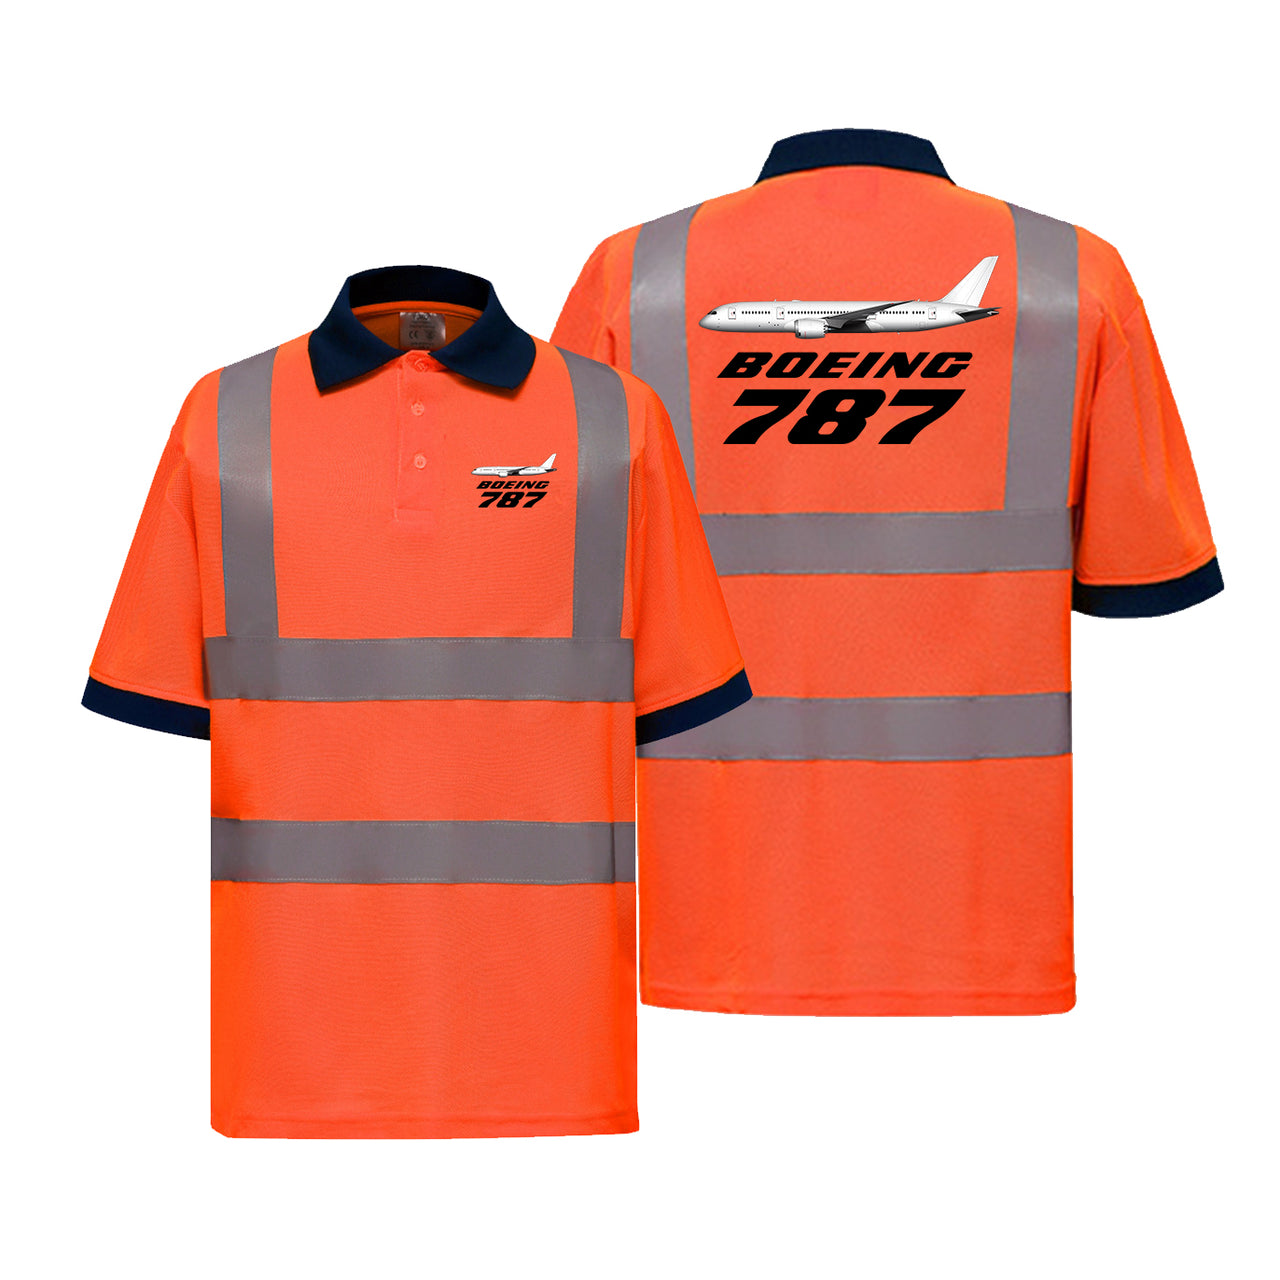 The Boeing 787 Designed Reflective Polo T-Shirts